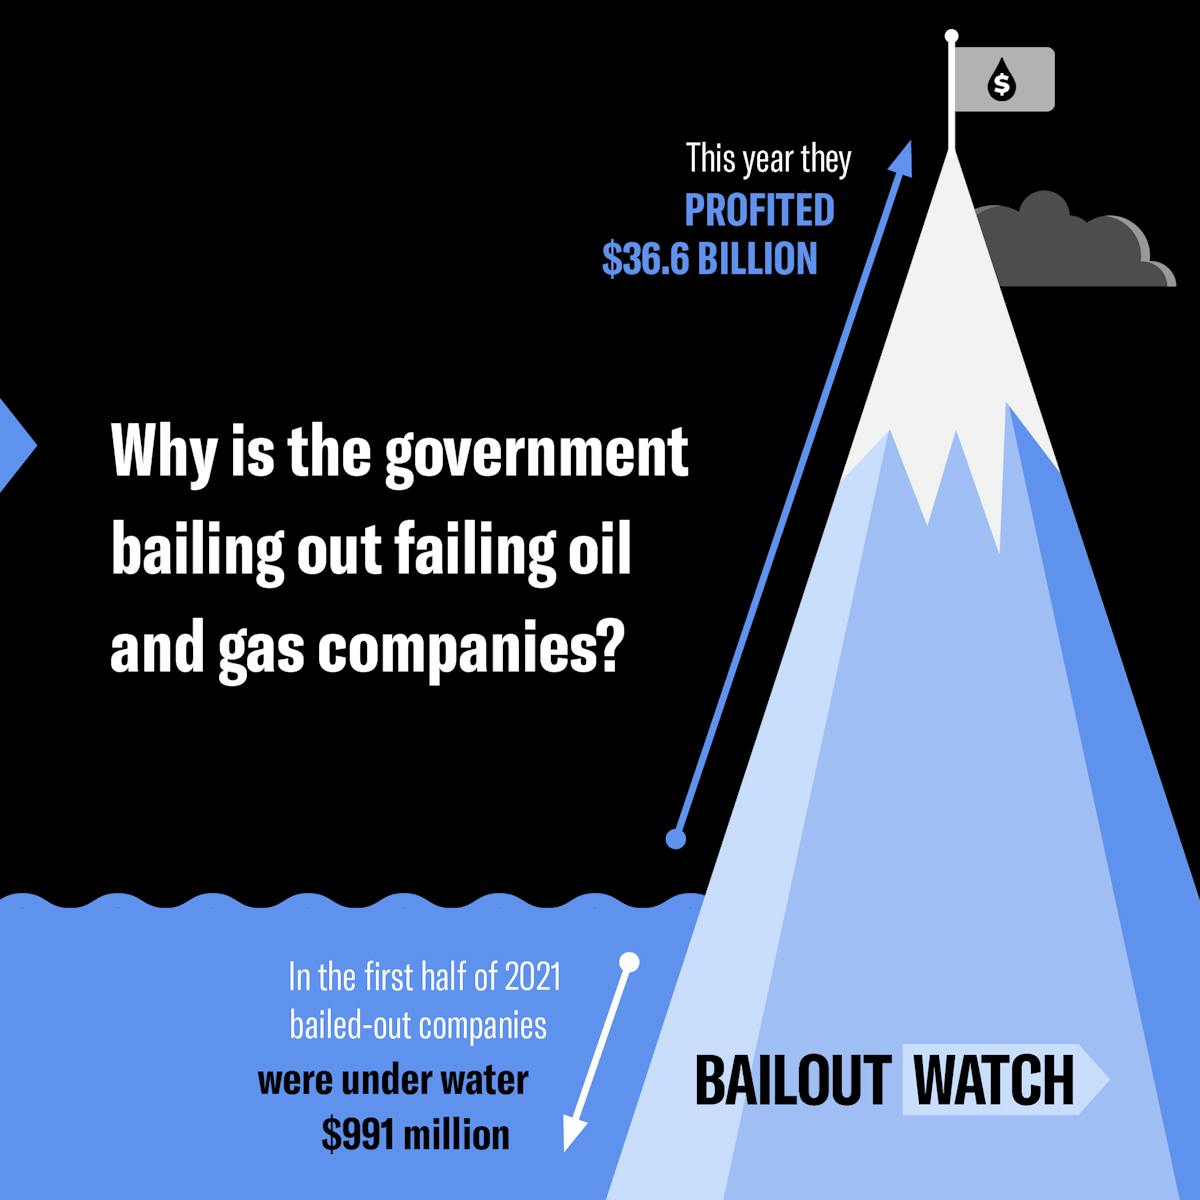 Graphic with text that says "Why is the government bailout out failing oil and gas companies?" There is an illustration of a mountain with the bottom third underwater. Next to the underwater portion of the mountain, text says "In the first half of 2021 bailed-out companies were under water $991 million. Next to the above-water portion of the mountain, the text says "This year they profited $36.6 billion."